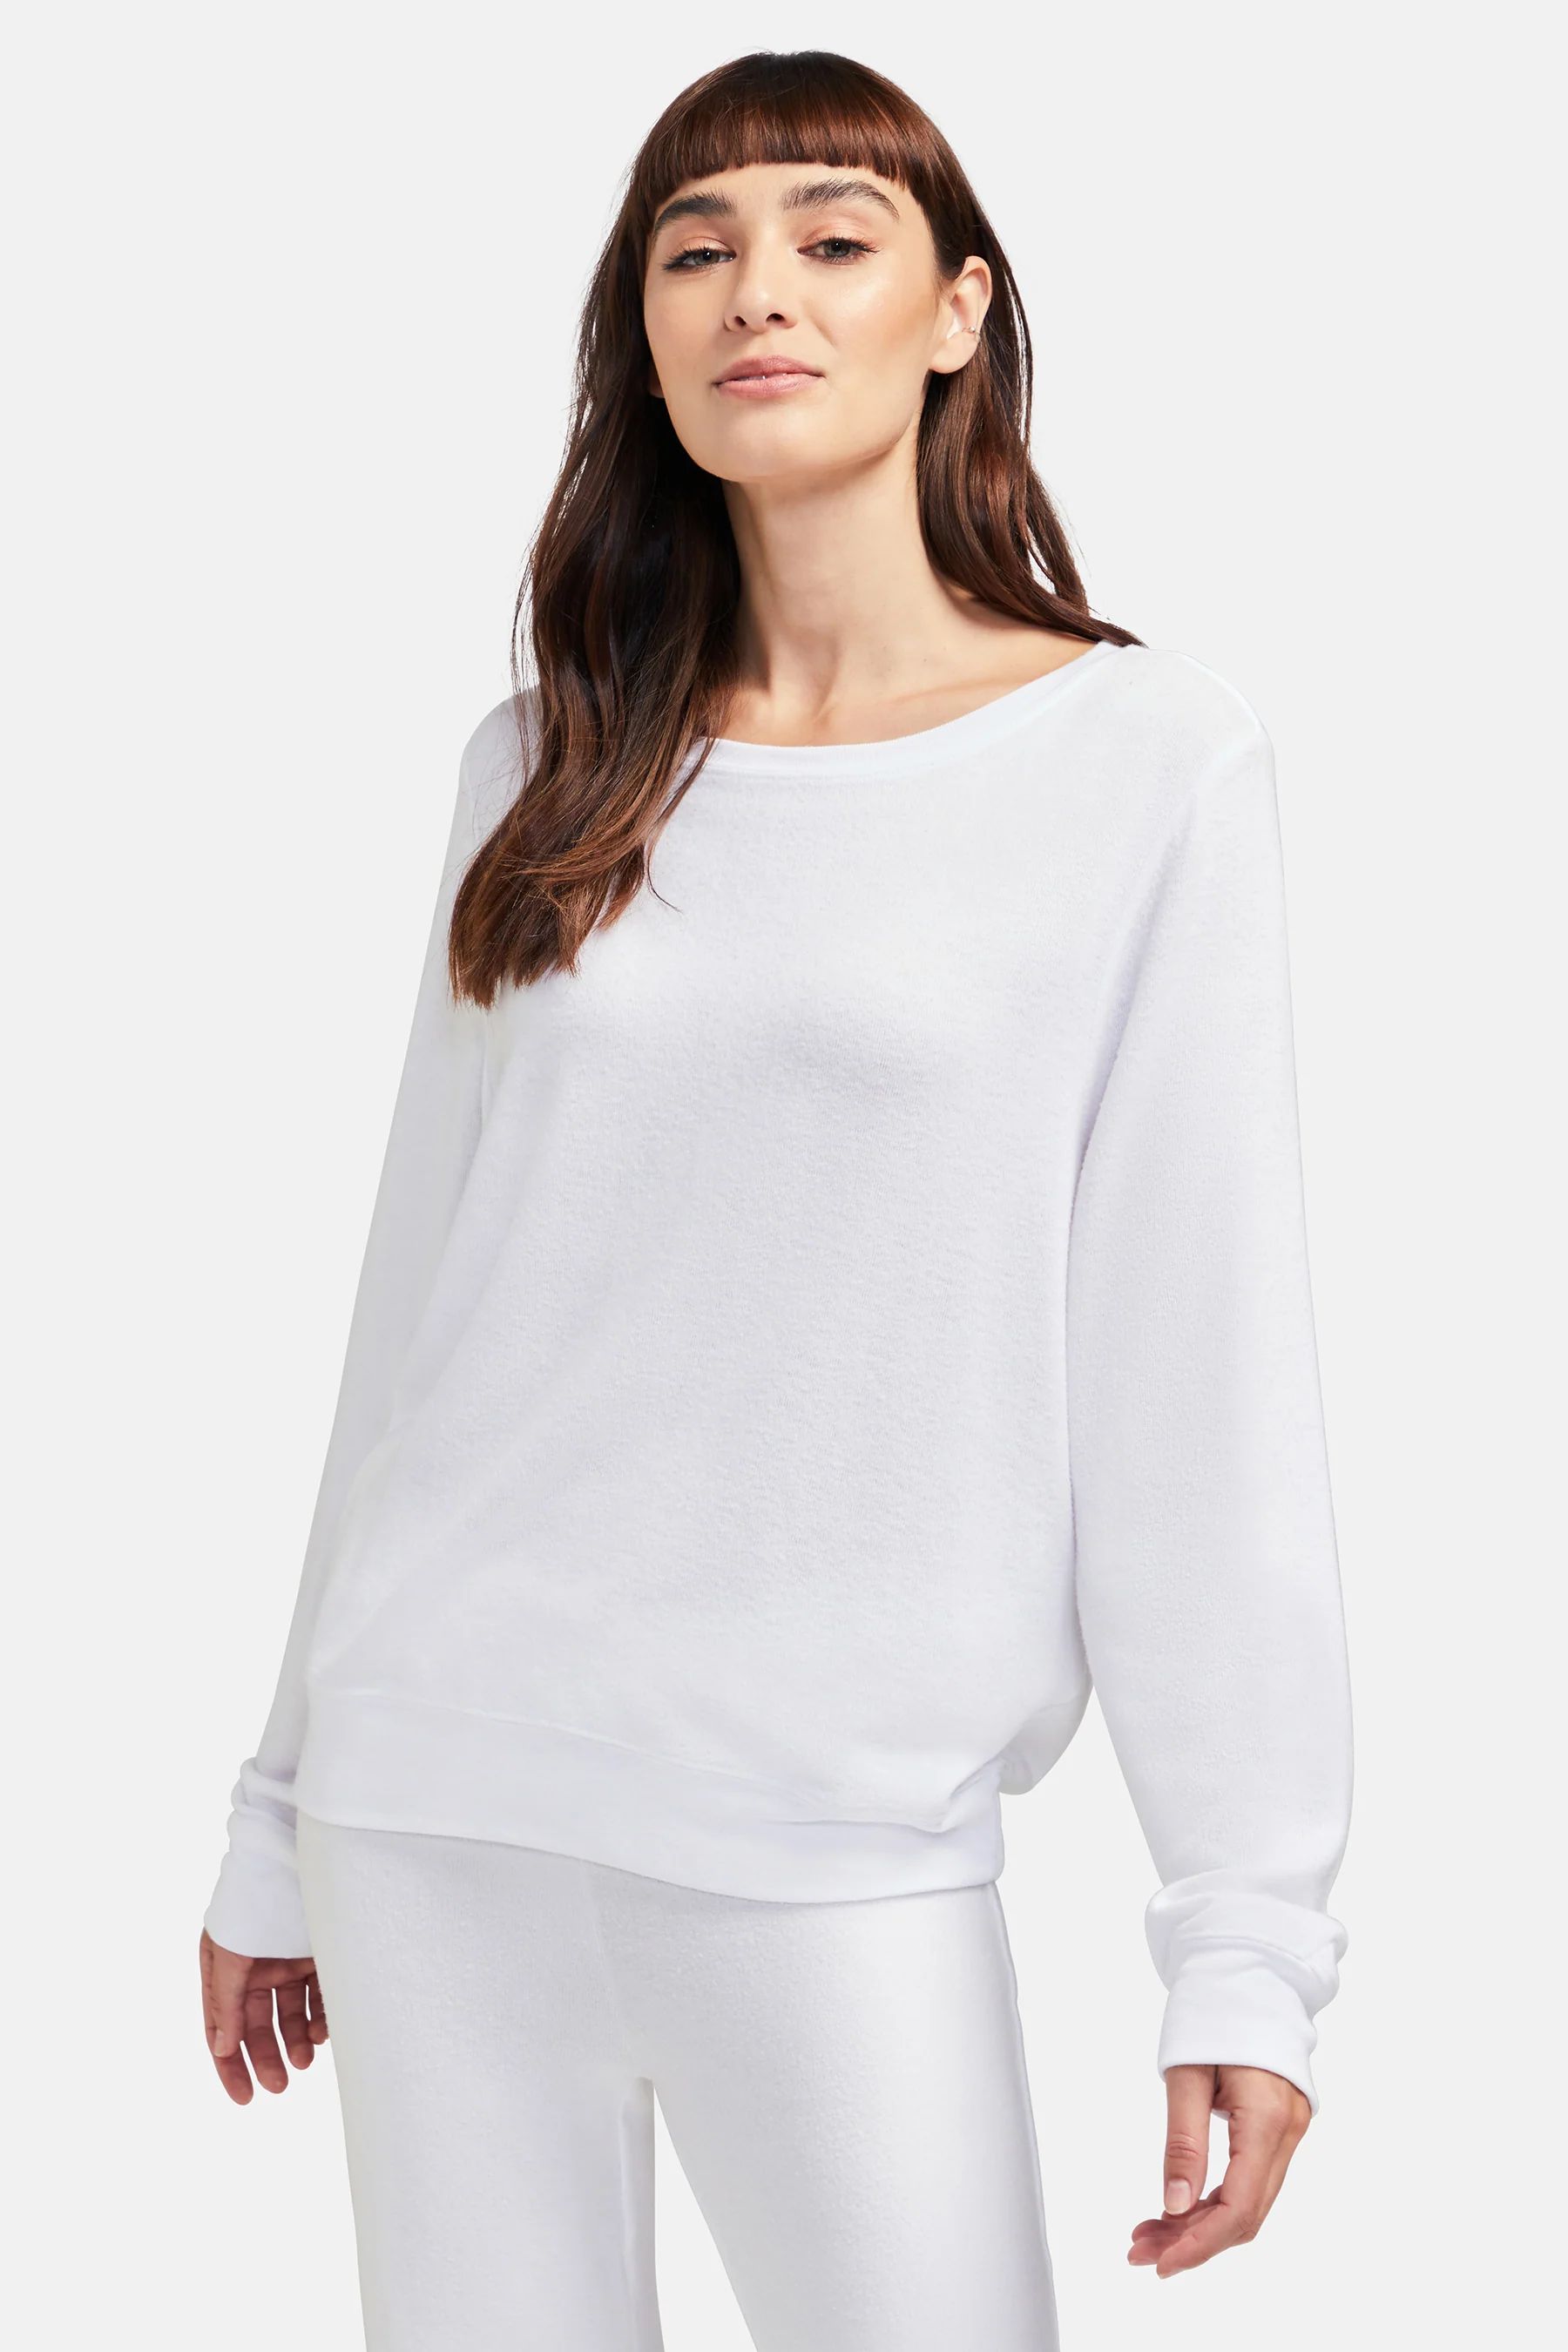 Women's Baggy Beach Jumper White Oversized Pullover | Wildfox